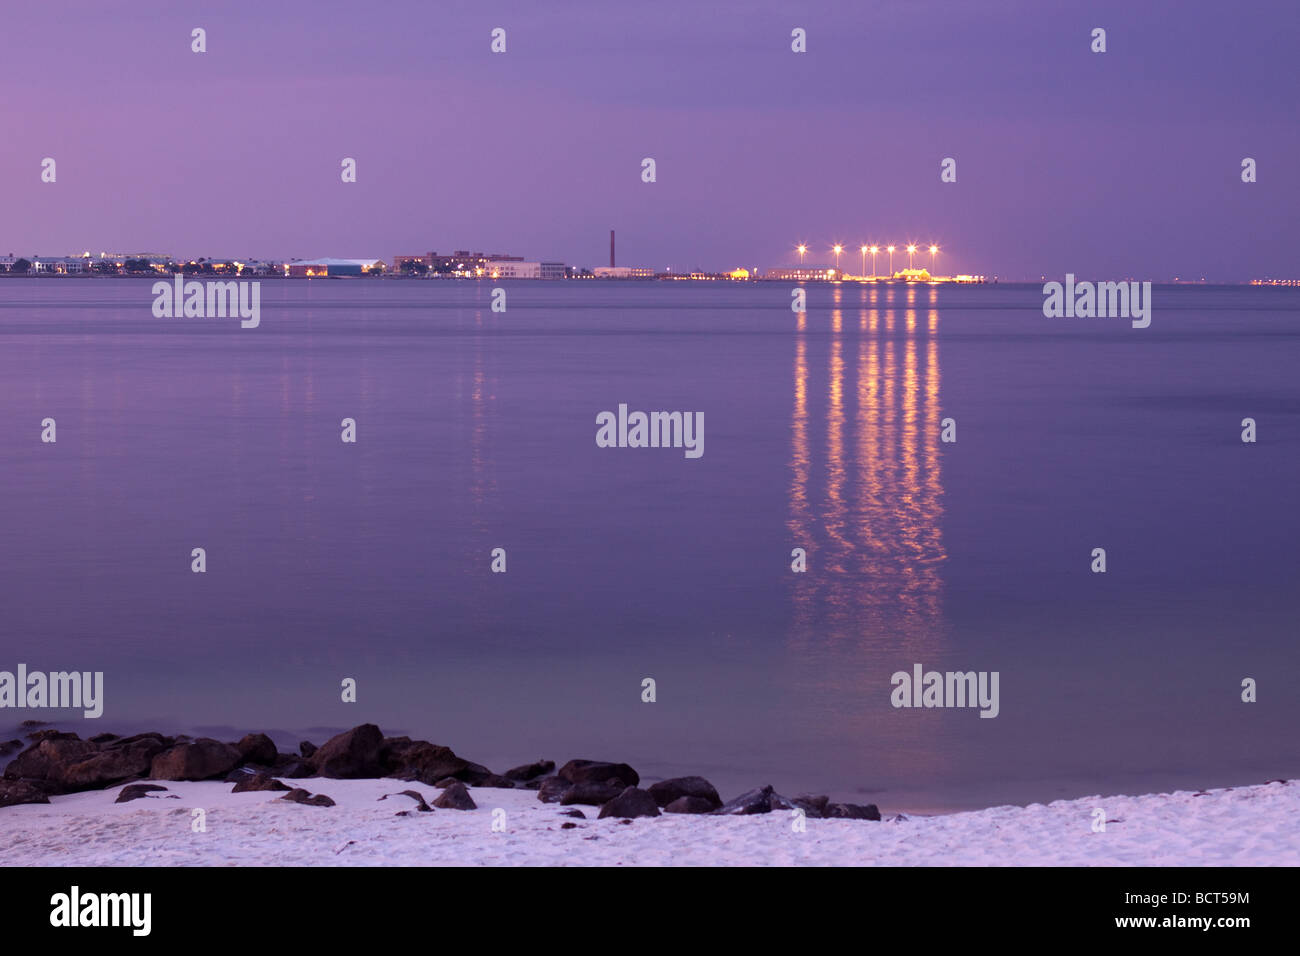 A light reflecting on water scene of Pensacola Bay at dusk looking Northeast towards the Naval Air Station from Ft Pickens. Stock Photo